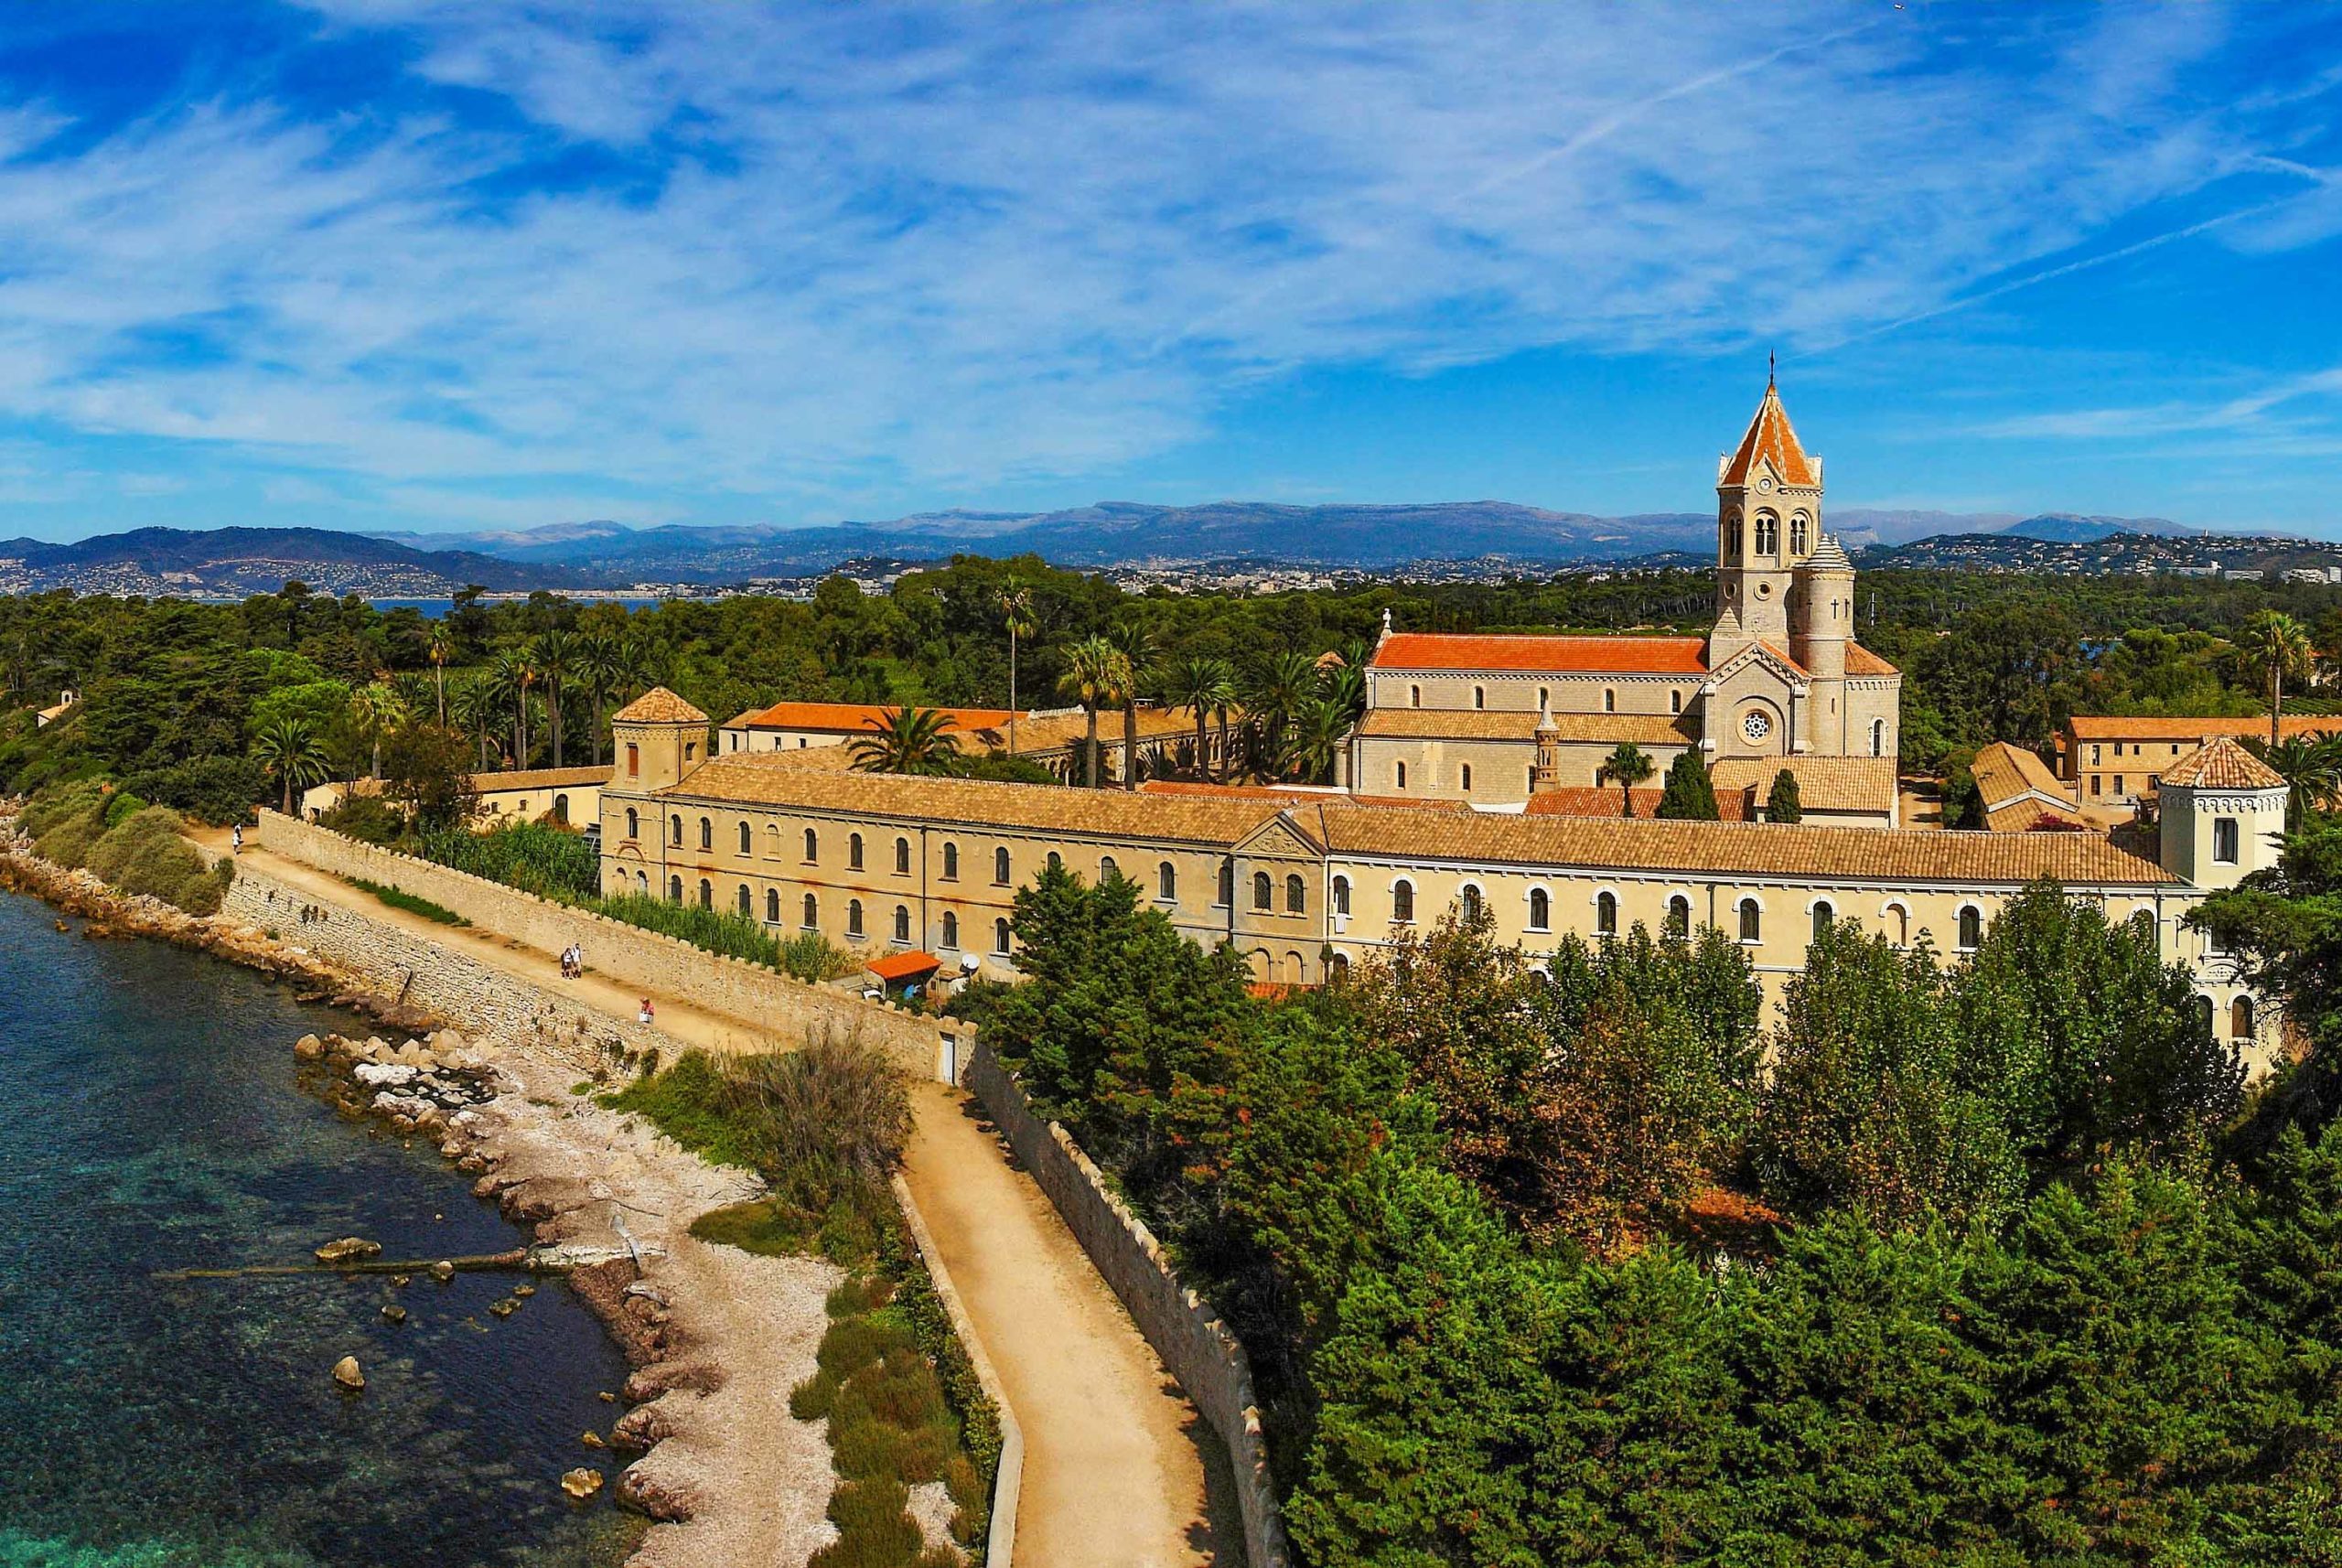 The Lérins monastery off Cannes © Alberto Fernandez Fernandez - licence [CC BY 2.5] from Wikimedia Commons